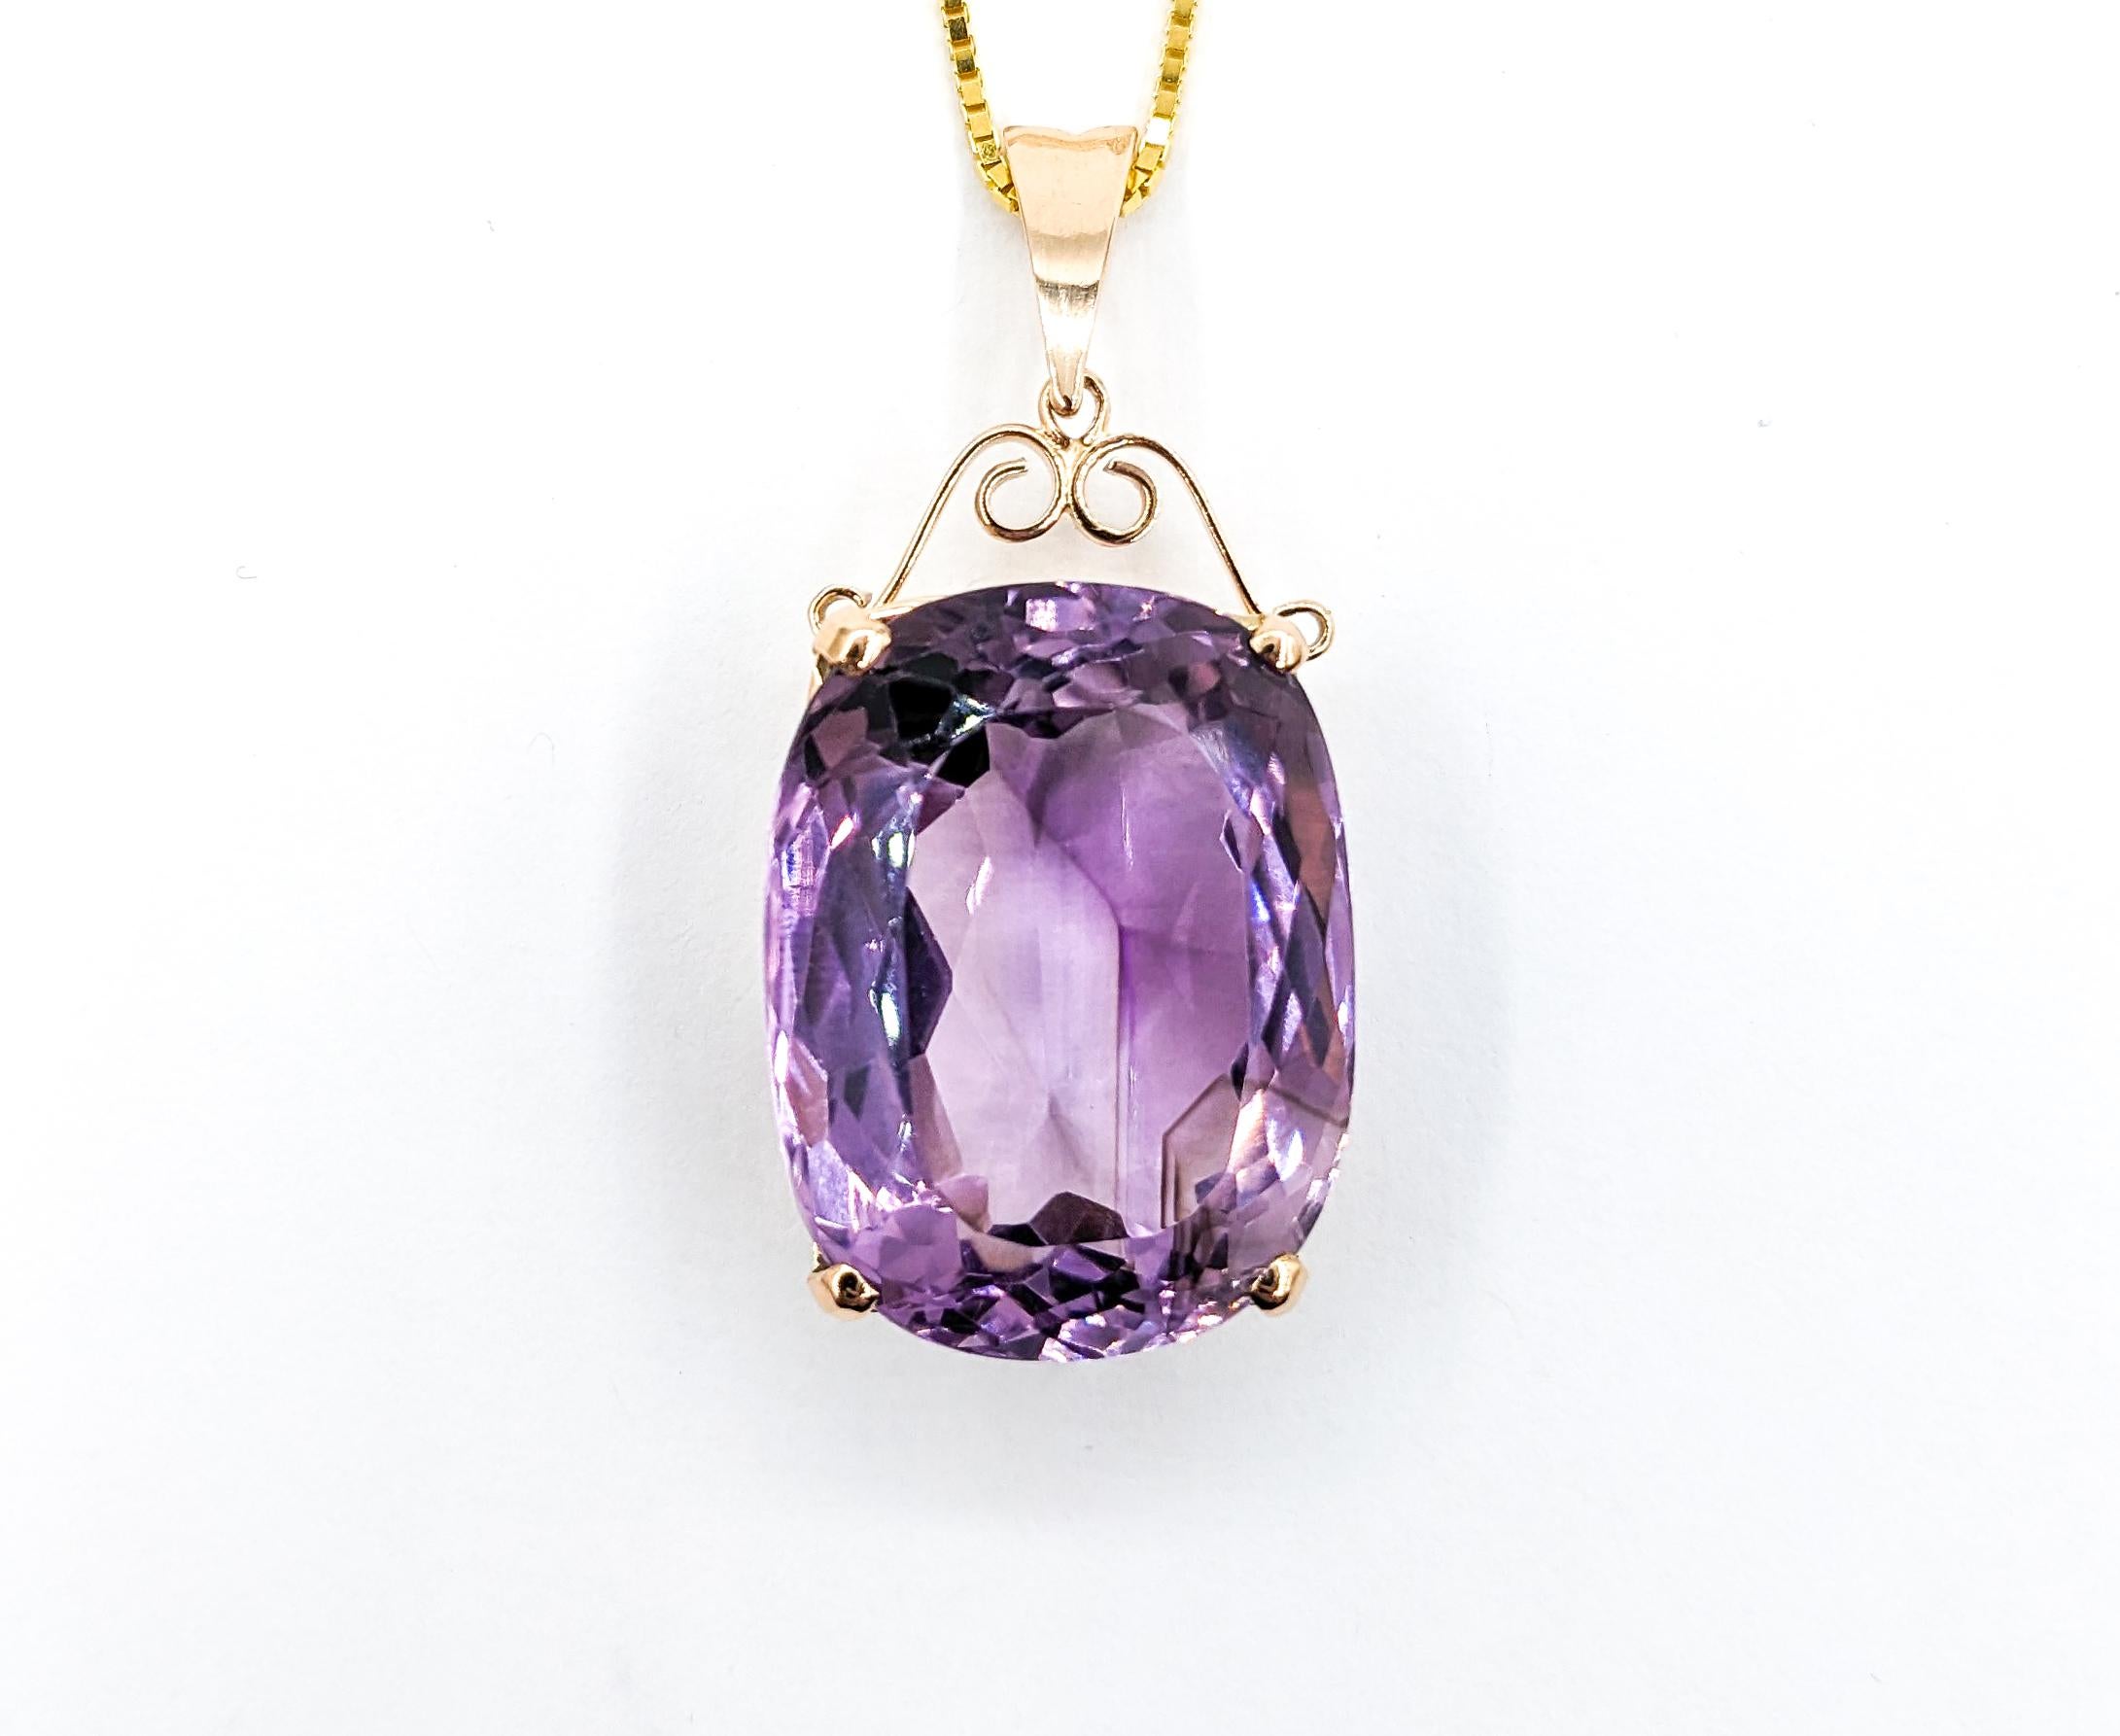 46ct Amethyst pendant With Chain In Yellow Gold

Showcasing a magnificent Gemstone Fashion Pendant, expertly crafted in 10/14kt Yellow Gold. This pendant is adorned with a scroll design, featuring a breathtaking 46ct Amethyst. Paired with a box